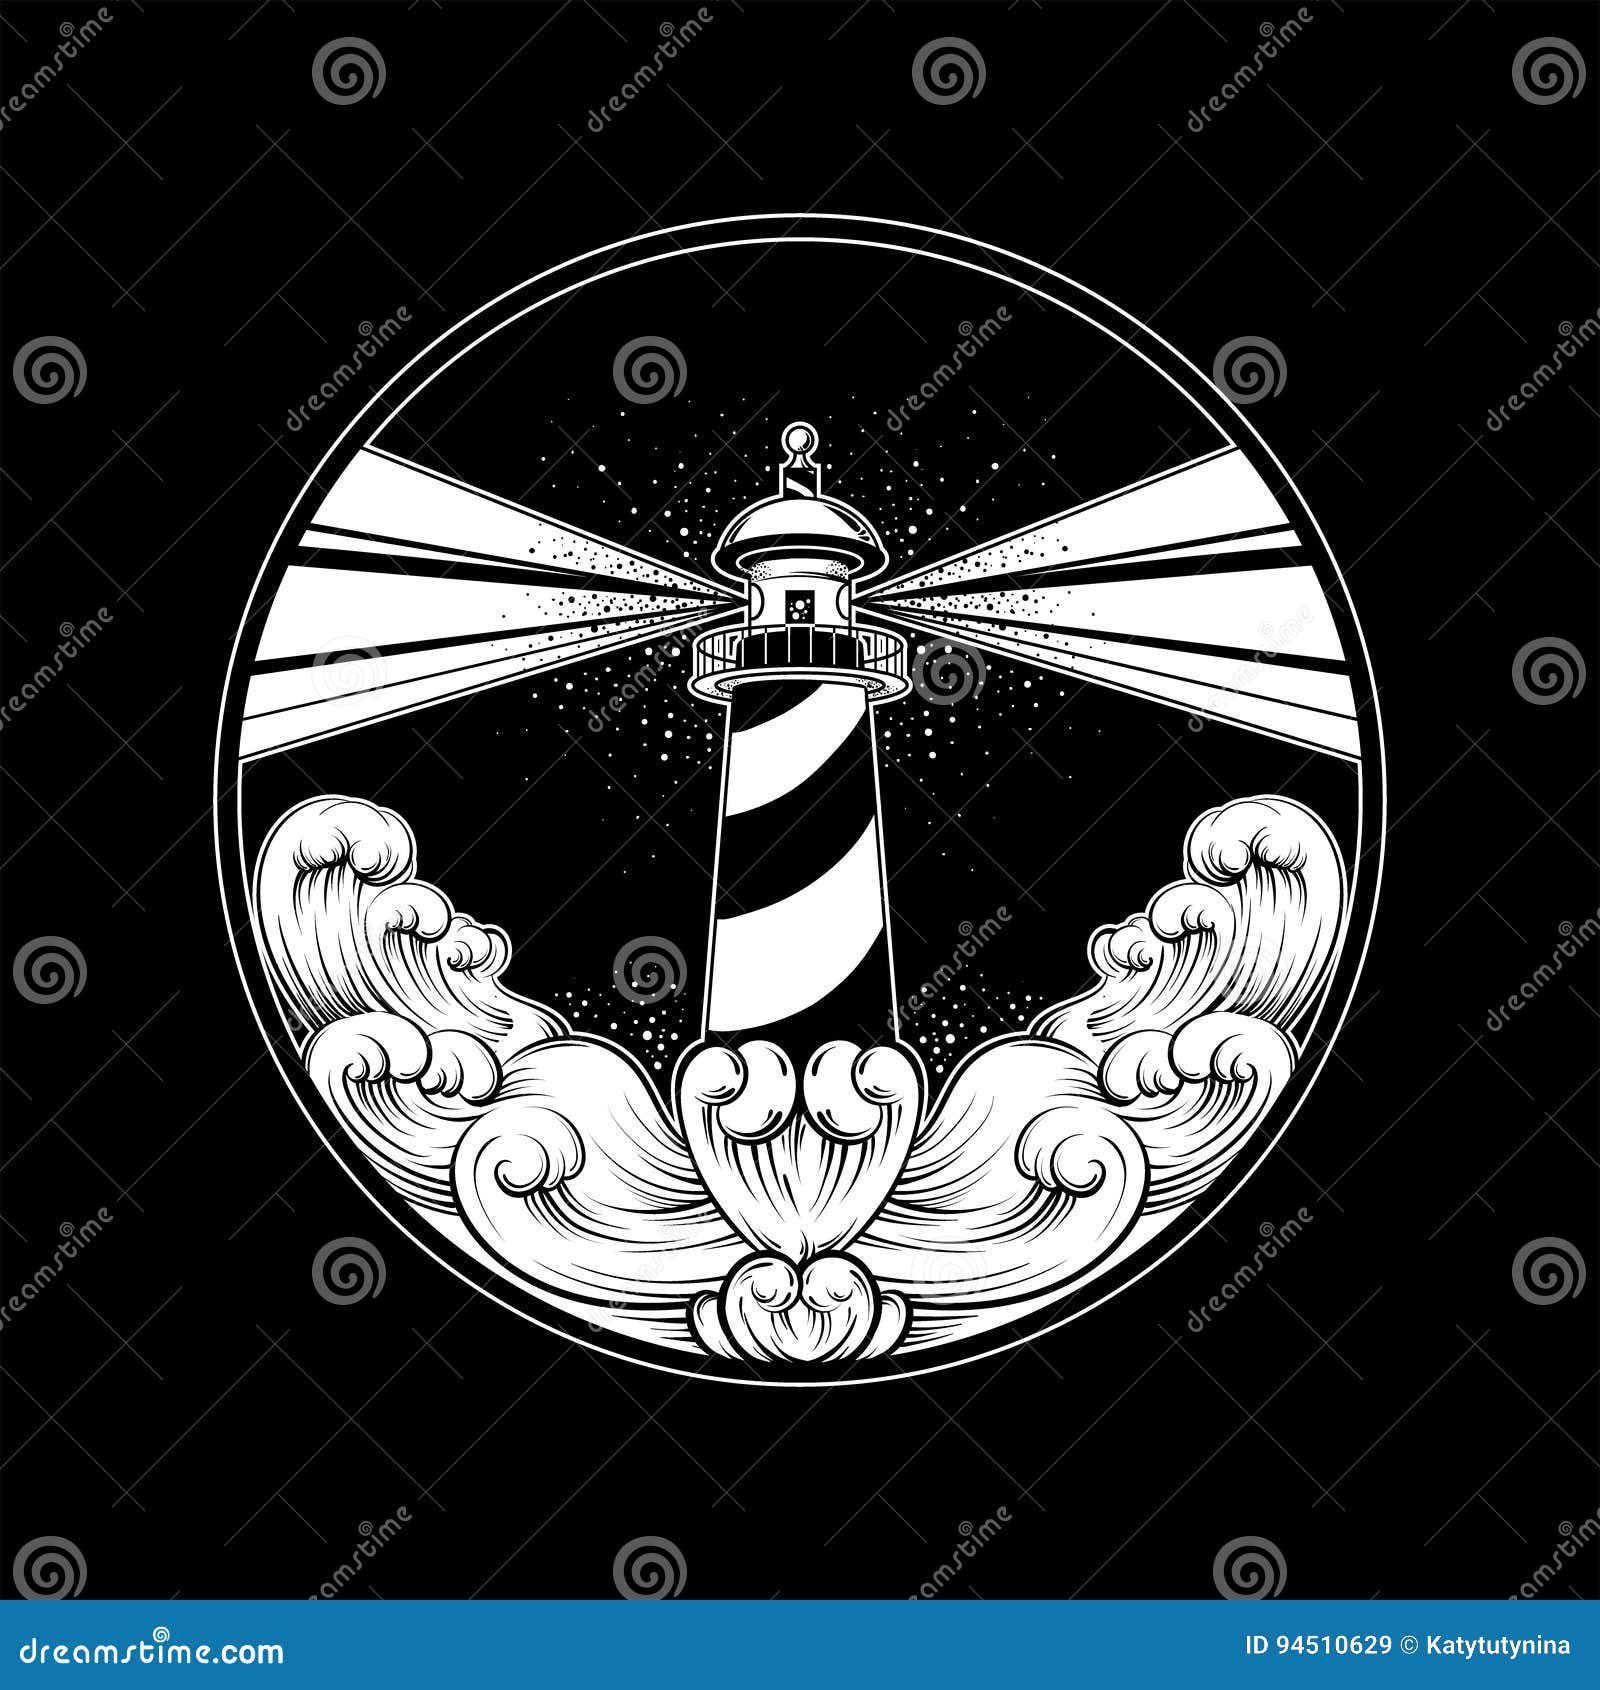 Discover 171+ lighthouse tattoo female